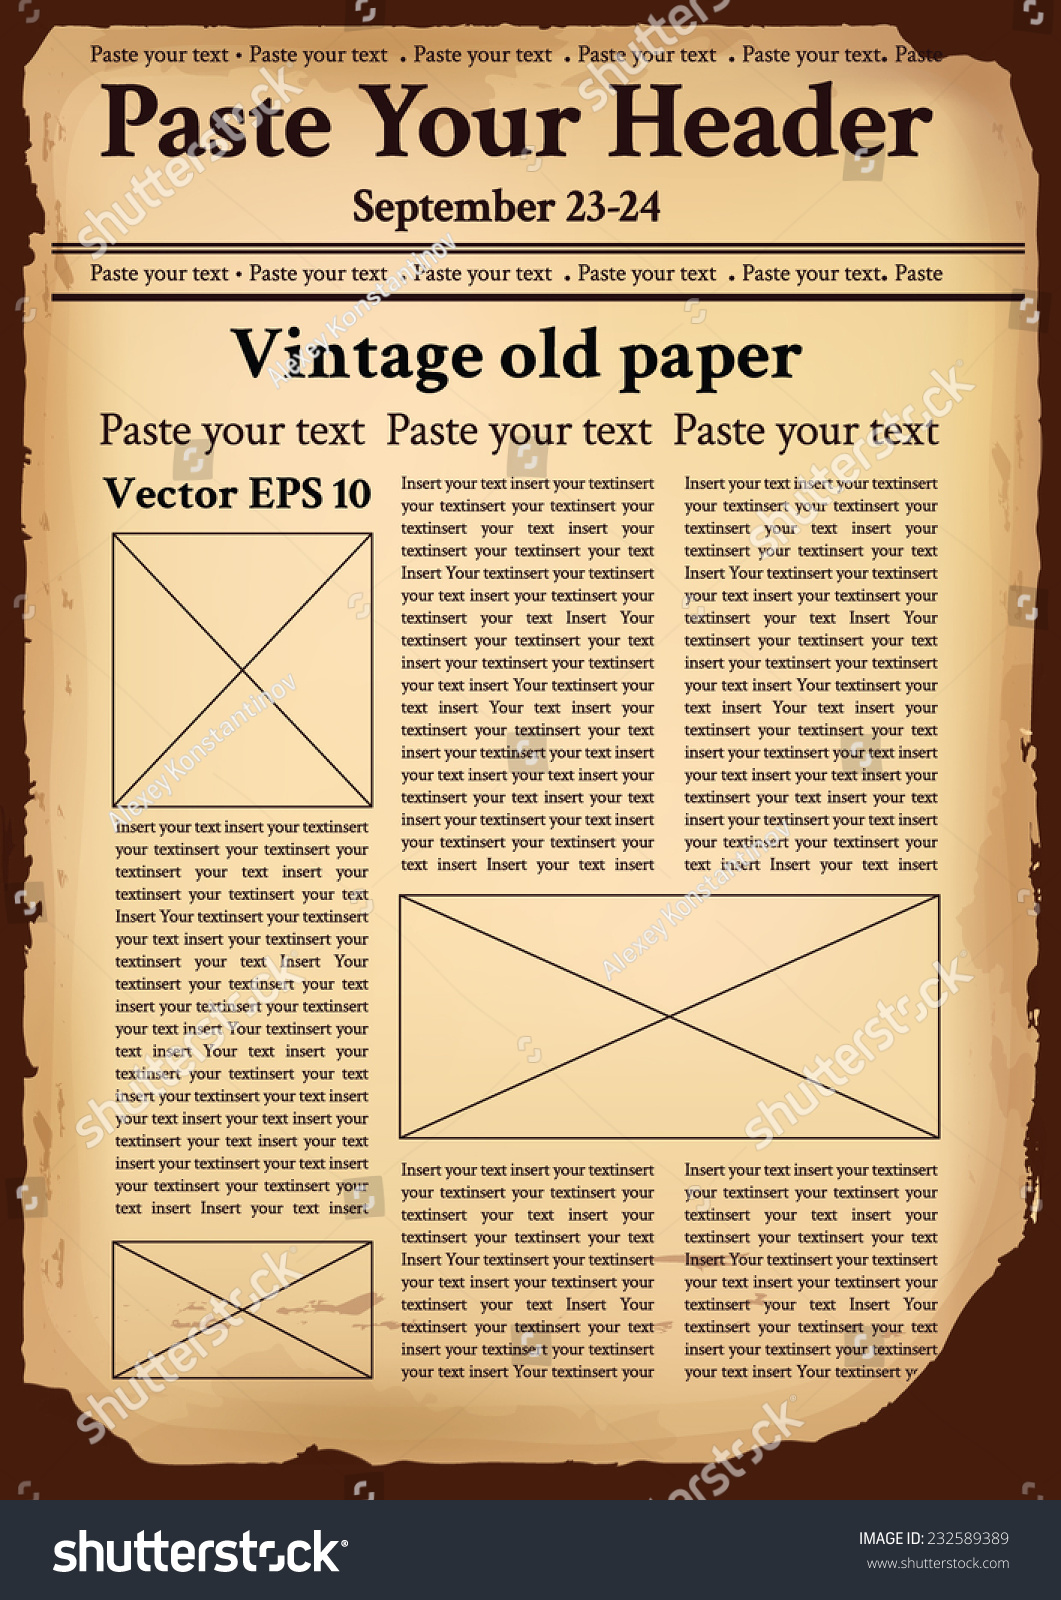 7,435 Old newspaper article Images, Stock Photos & Vectors | Shutterstock